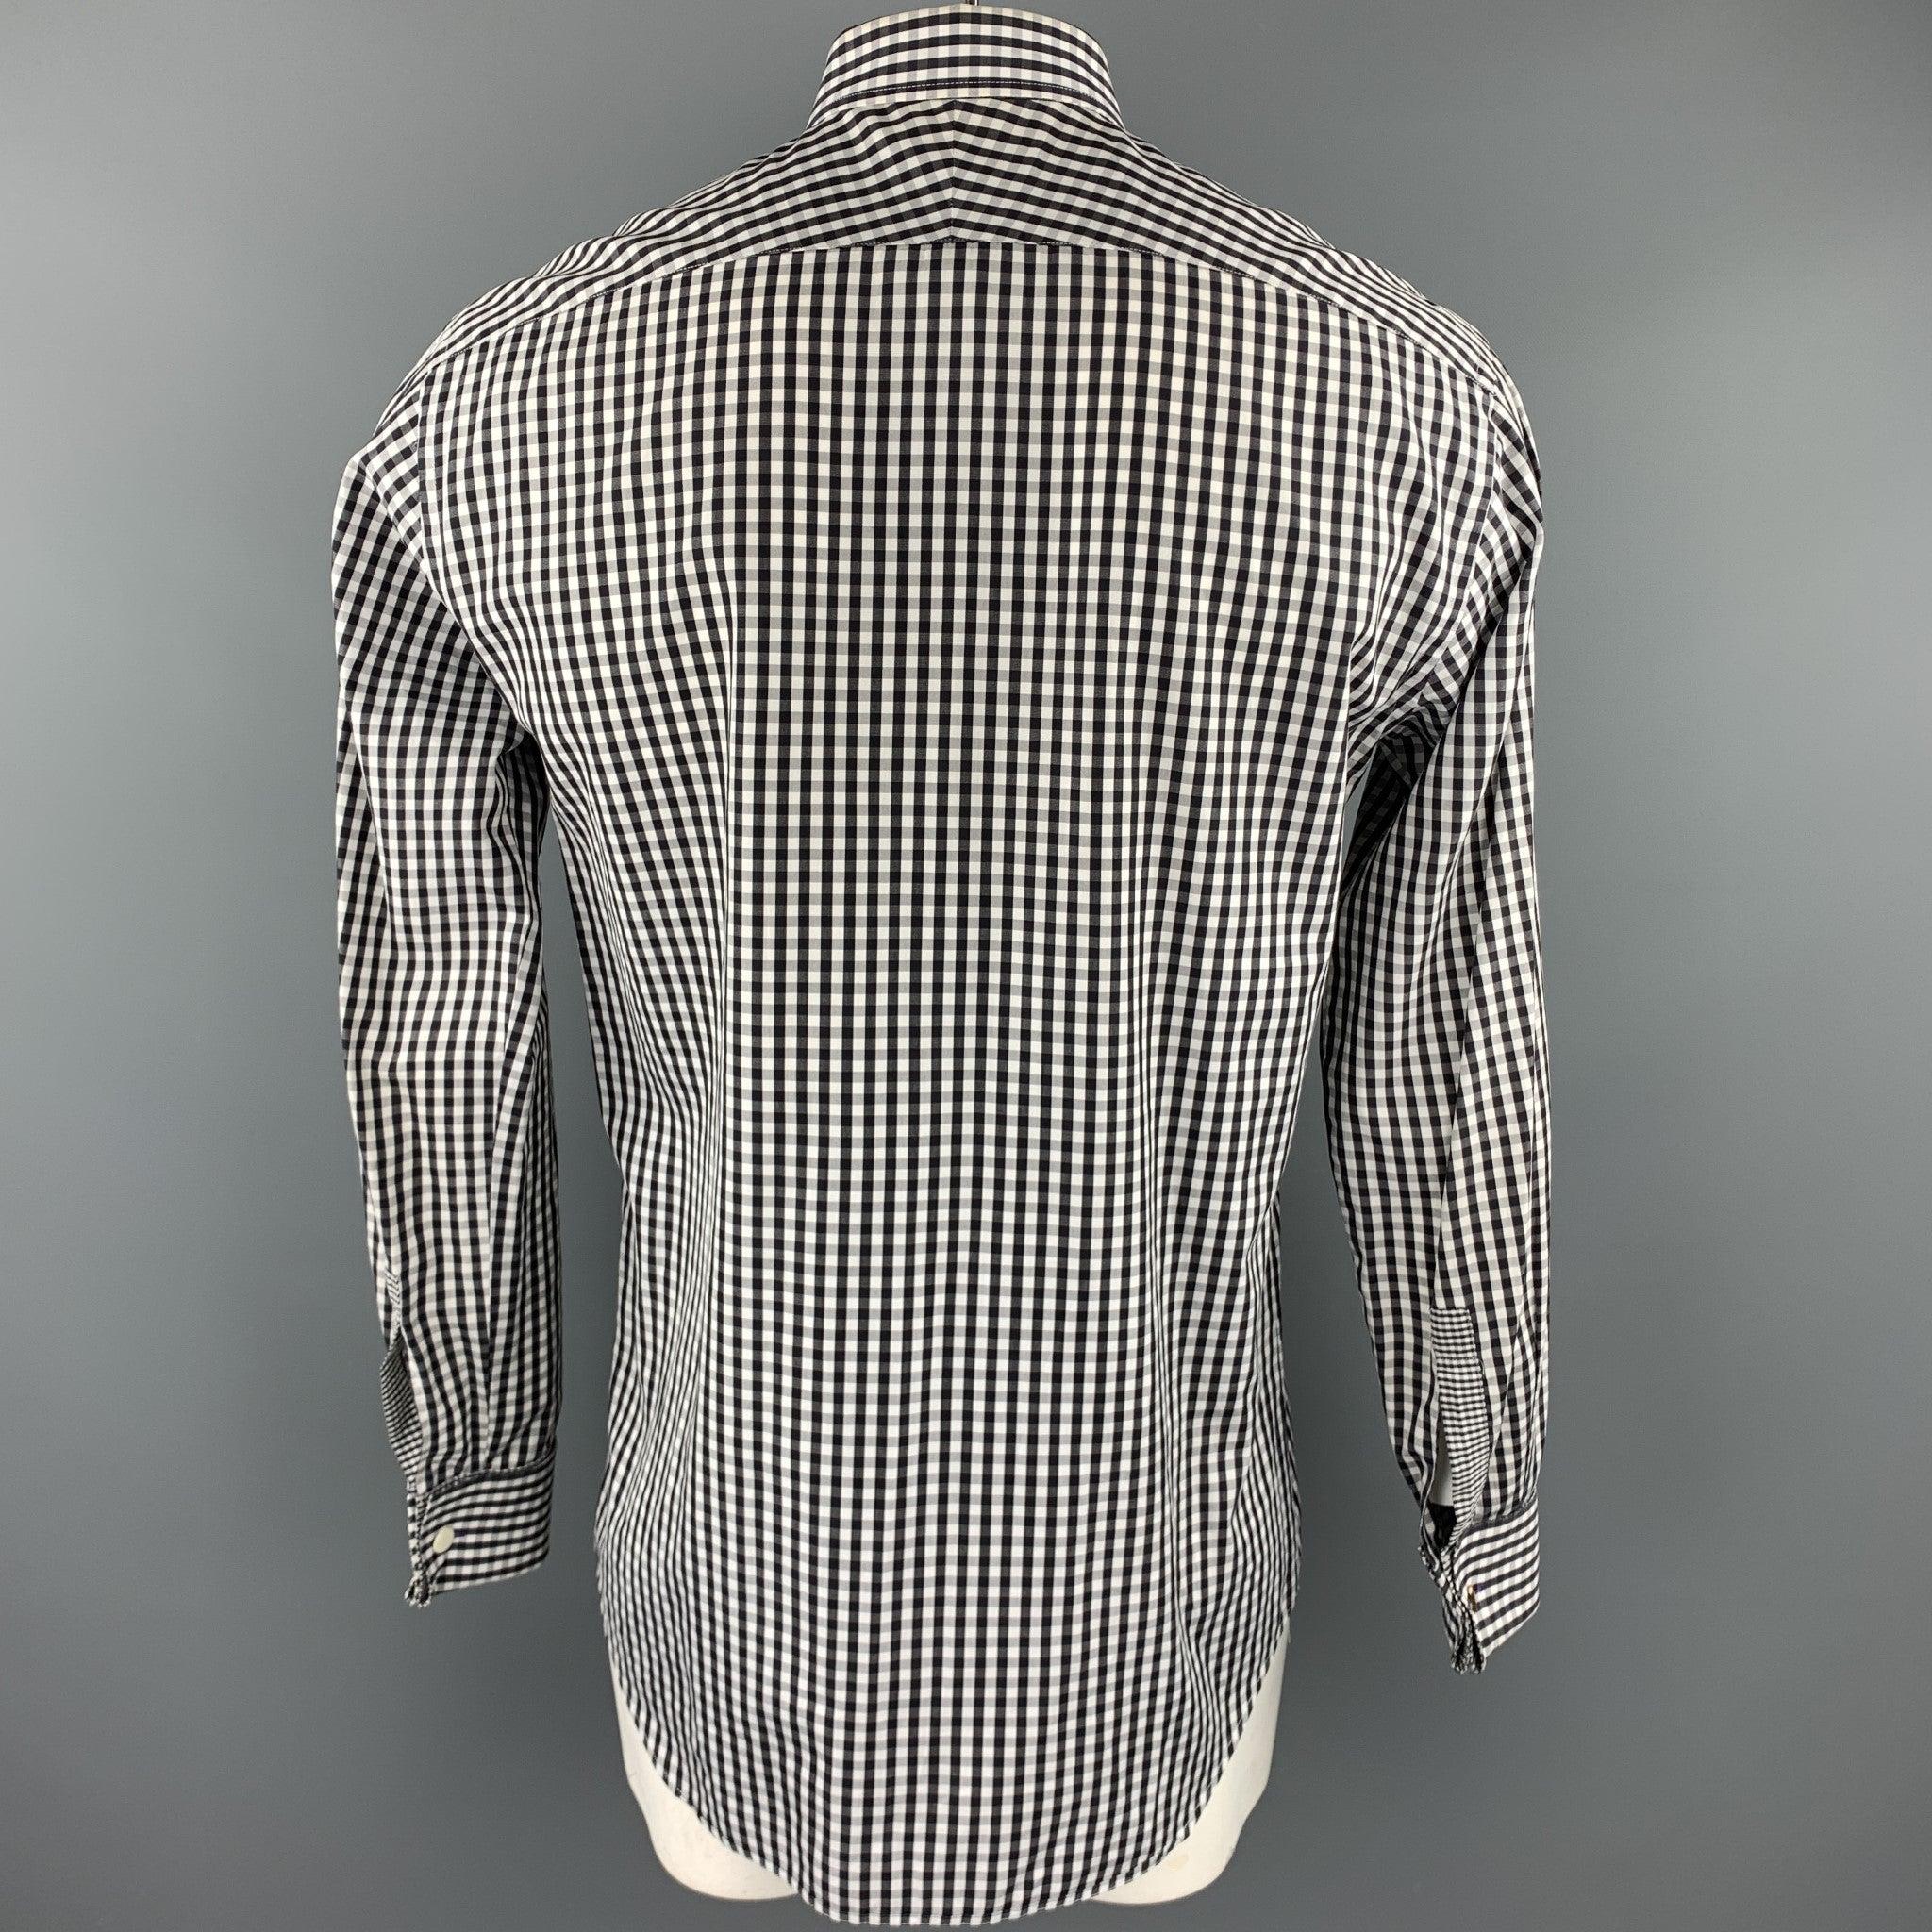 PAUL SMITH Size L Black & White Checkered Cotton French Cuff Long Sleeve Shirt In Good Condition For Sale In San Francisco, CA